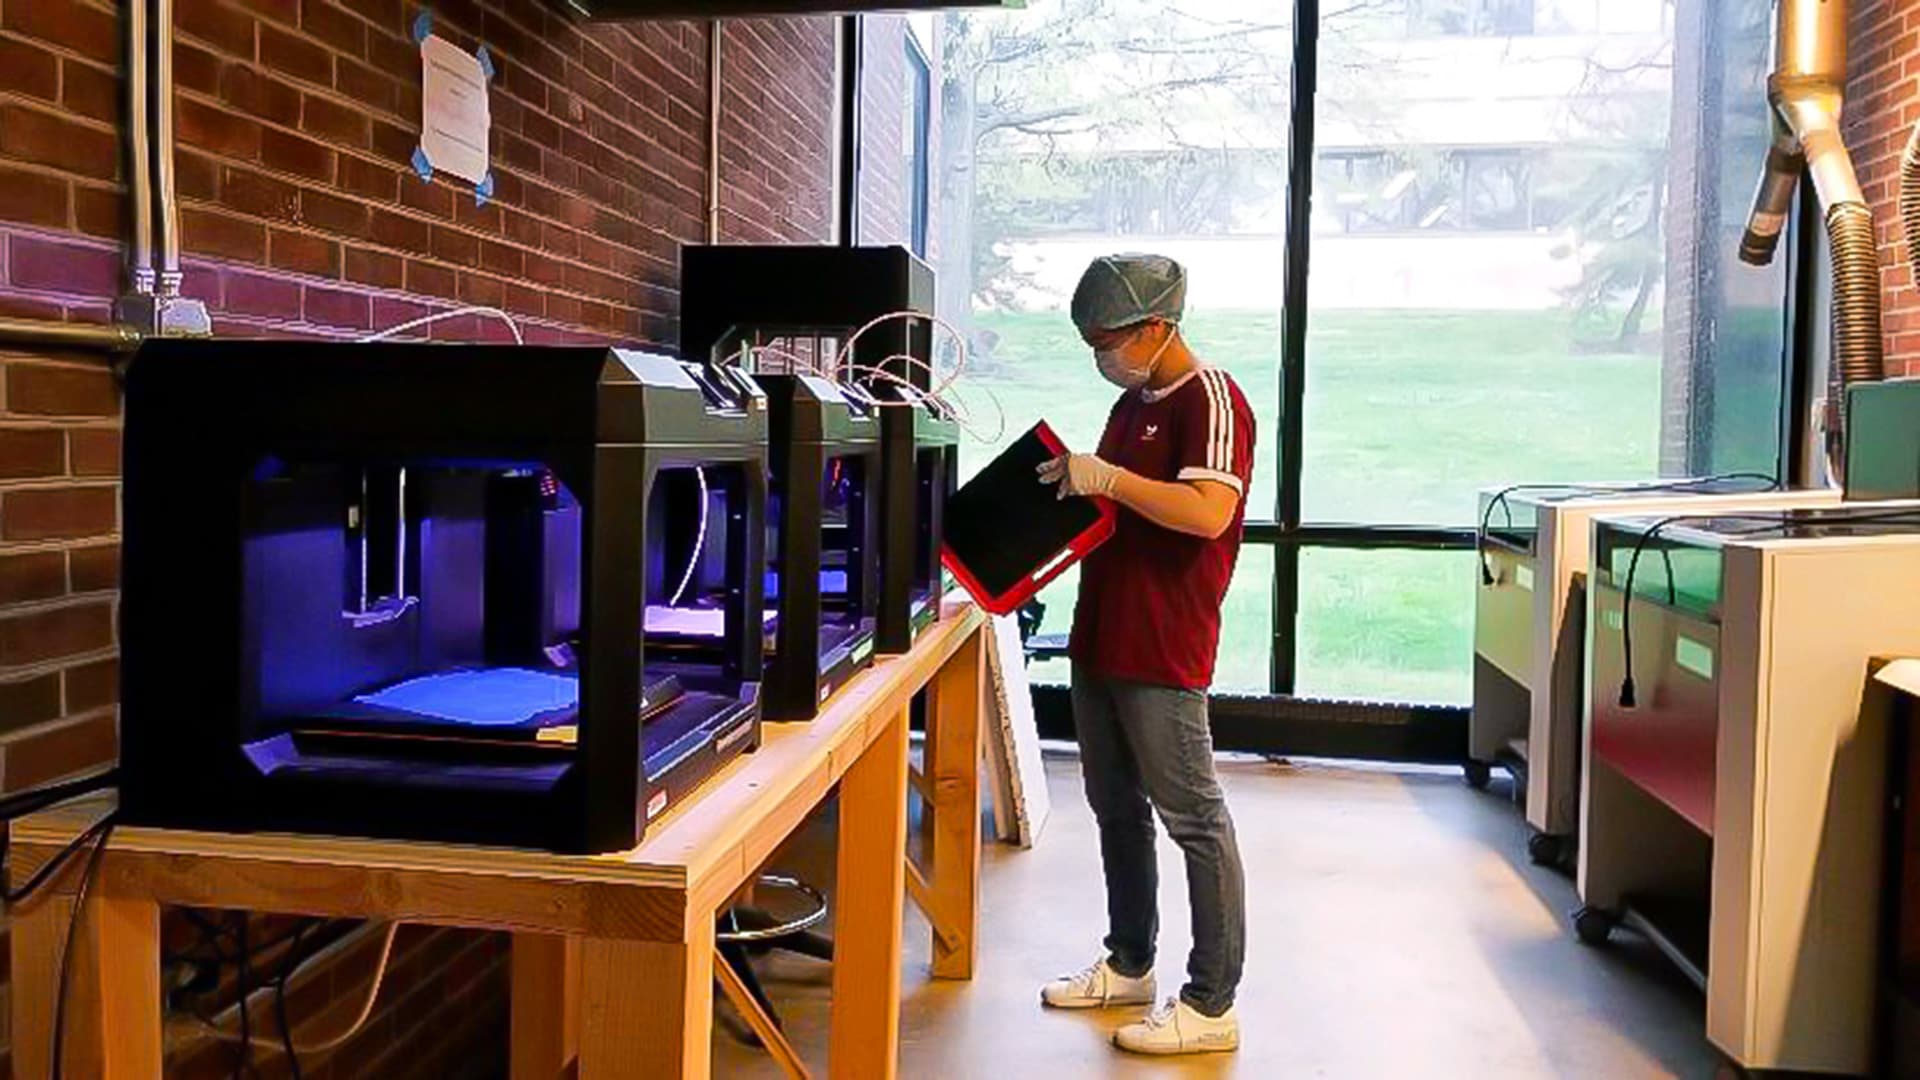 Student works with 3D printer in architecture FabLab